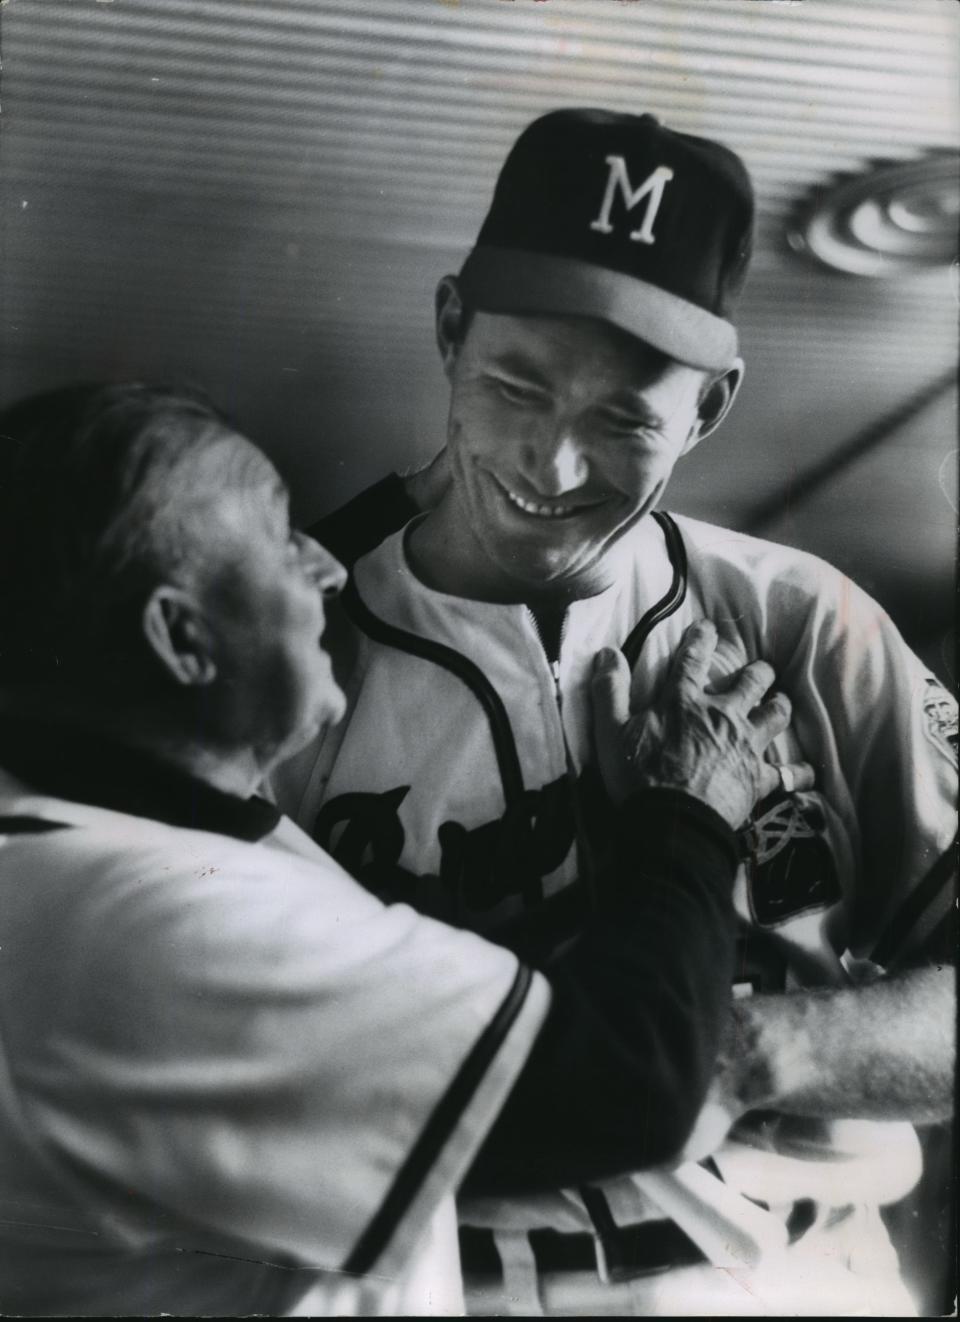 Joe Adcock, who played for the Milwaukee Braves, was inducted into the Walk of Fame in 2016.